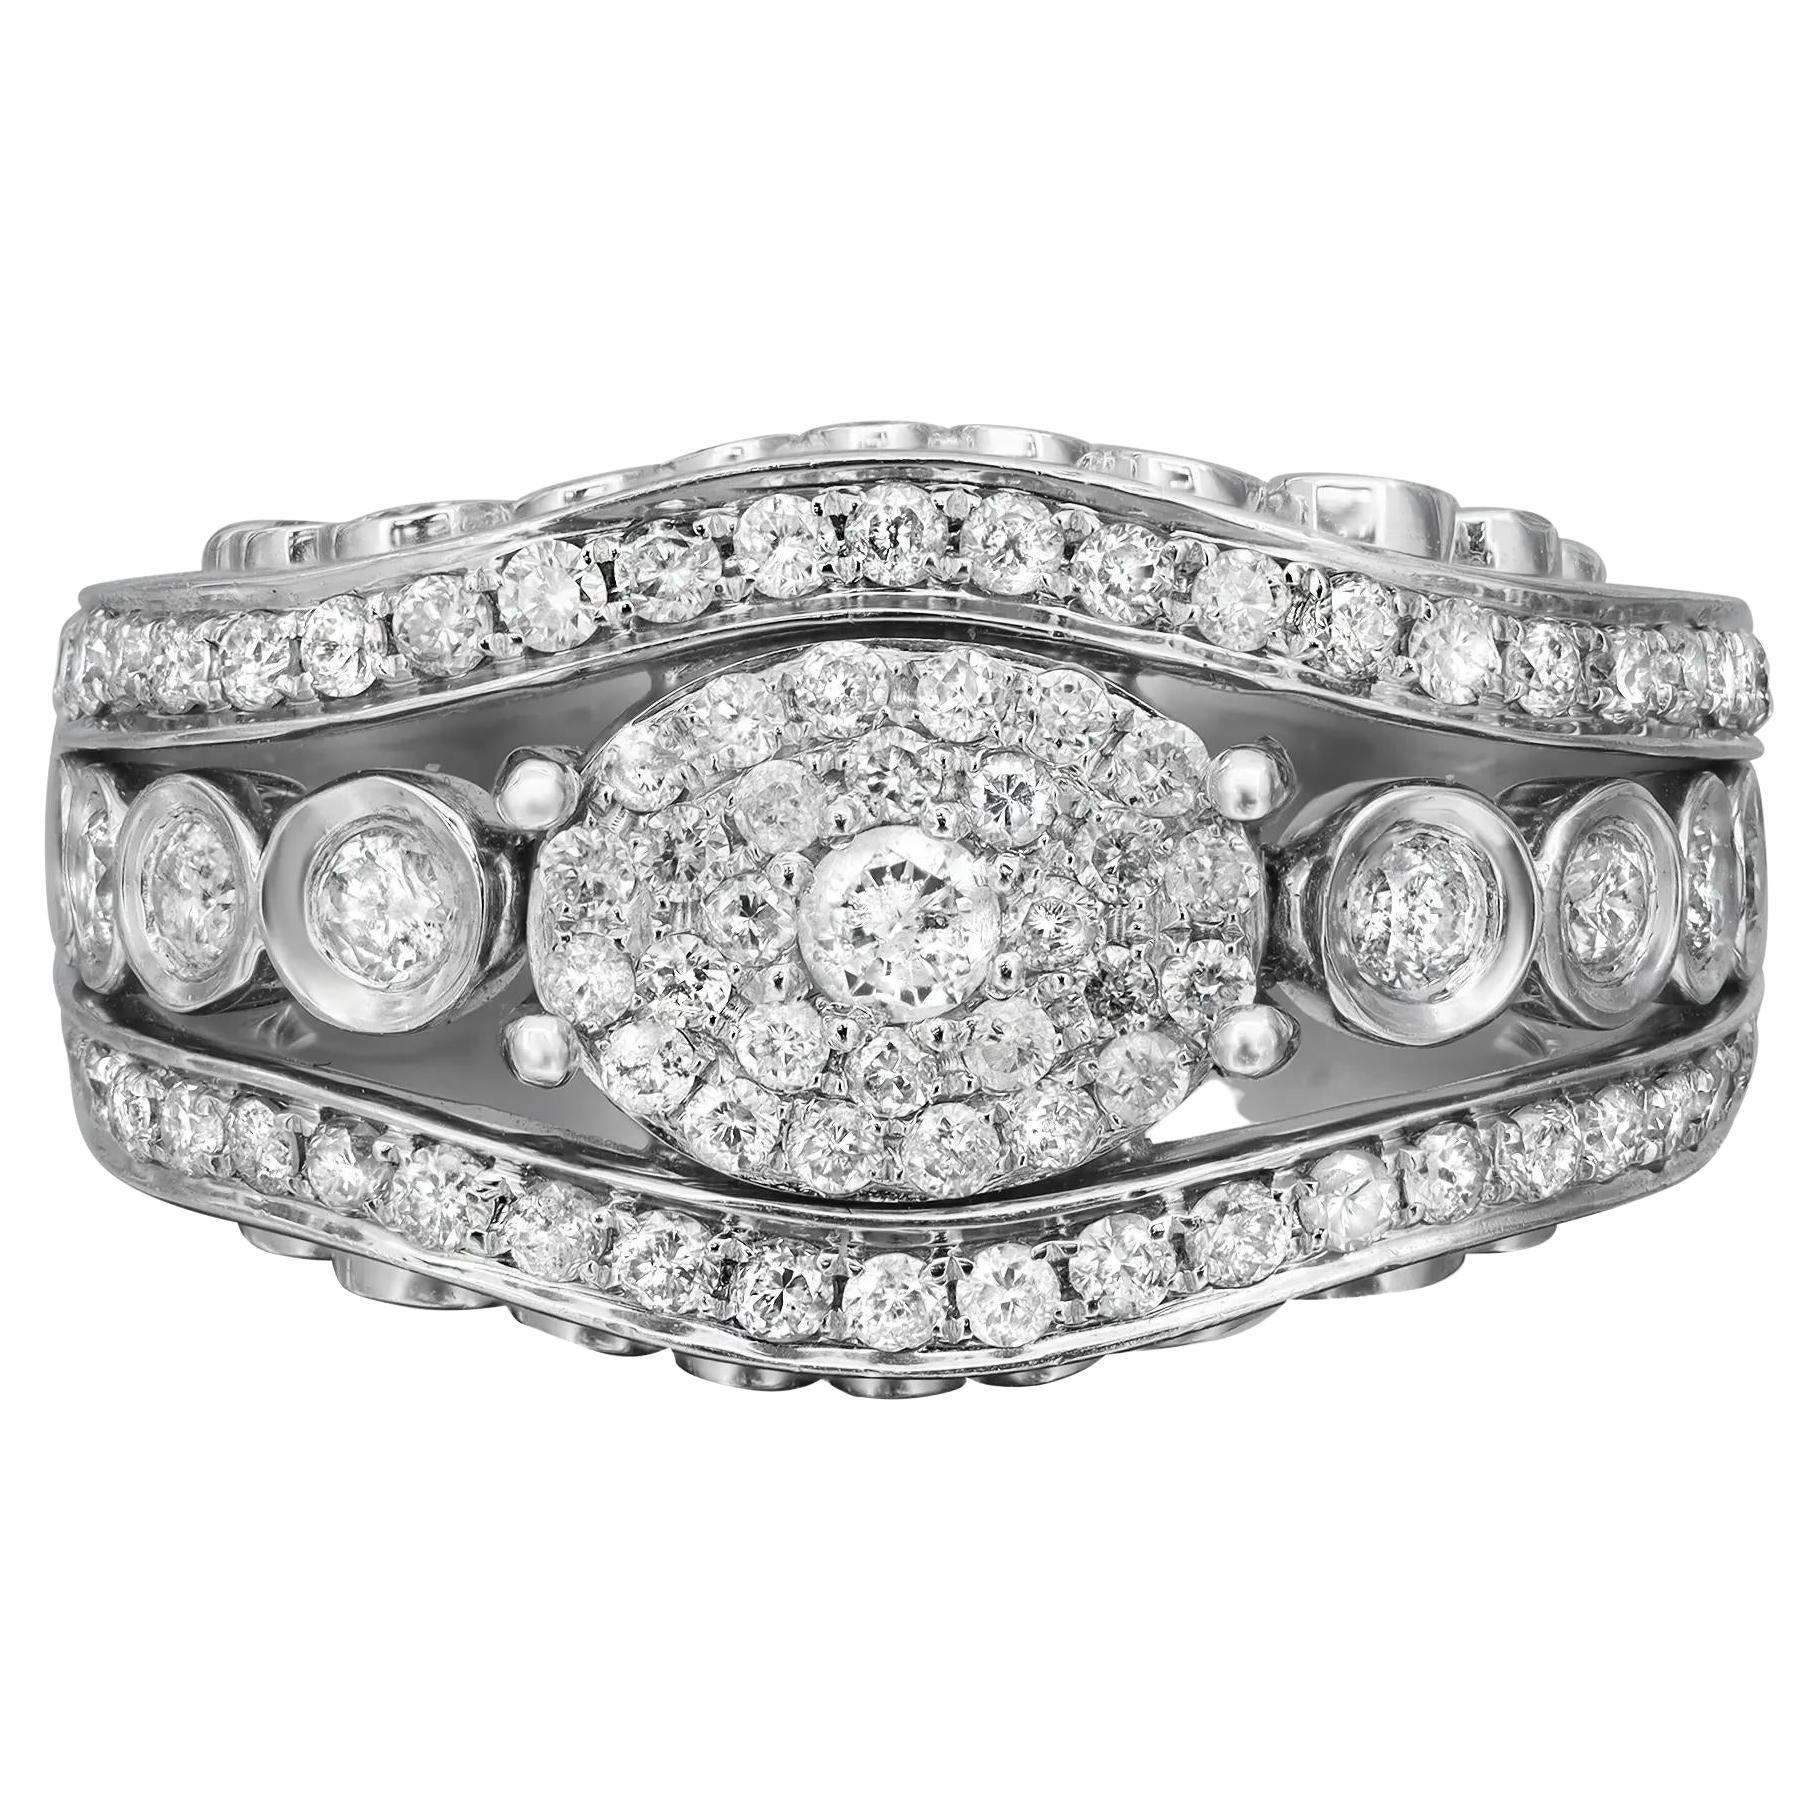 1.56cttw Pave and Bezel Set Round Diamond Cocktail Ring 14k White Gold For Sale